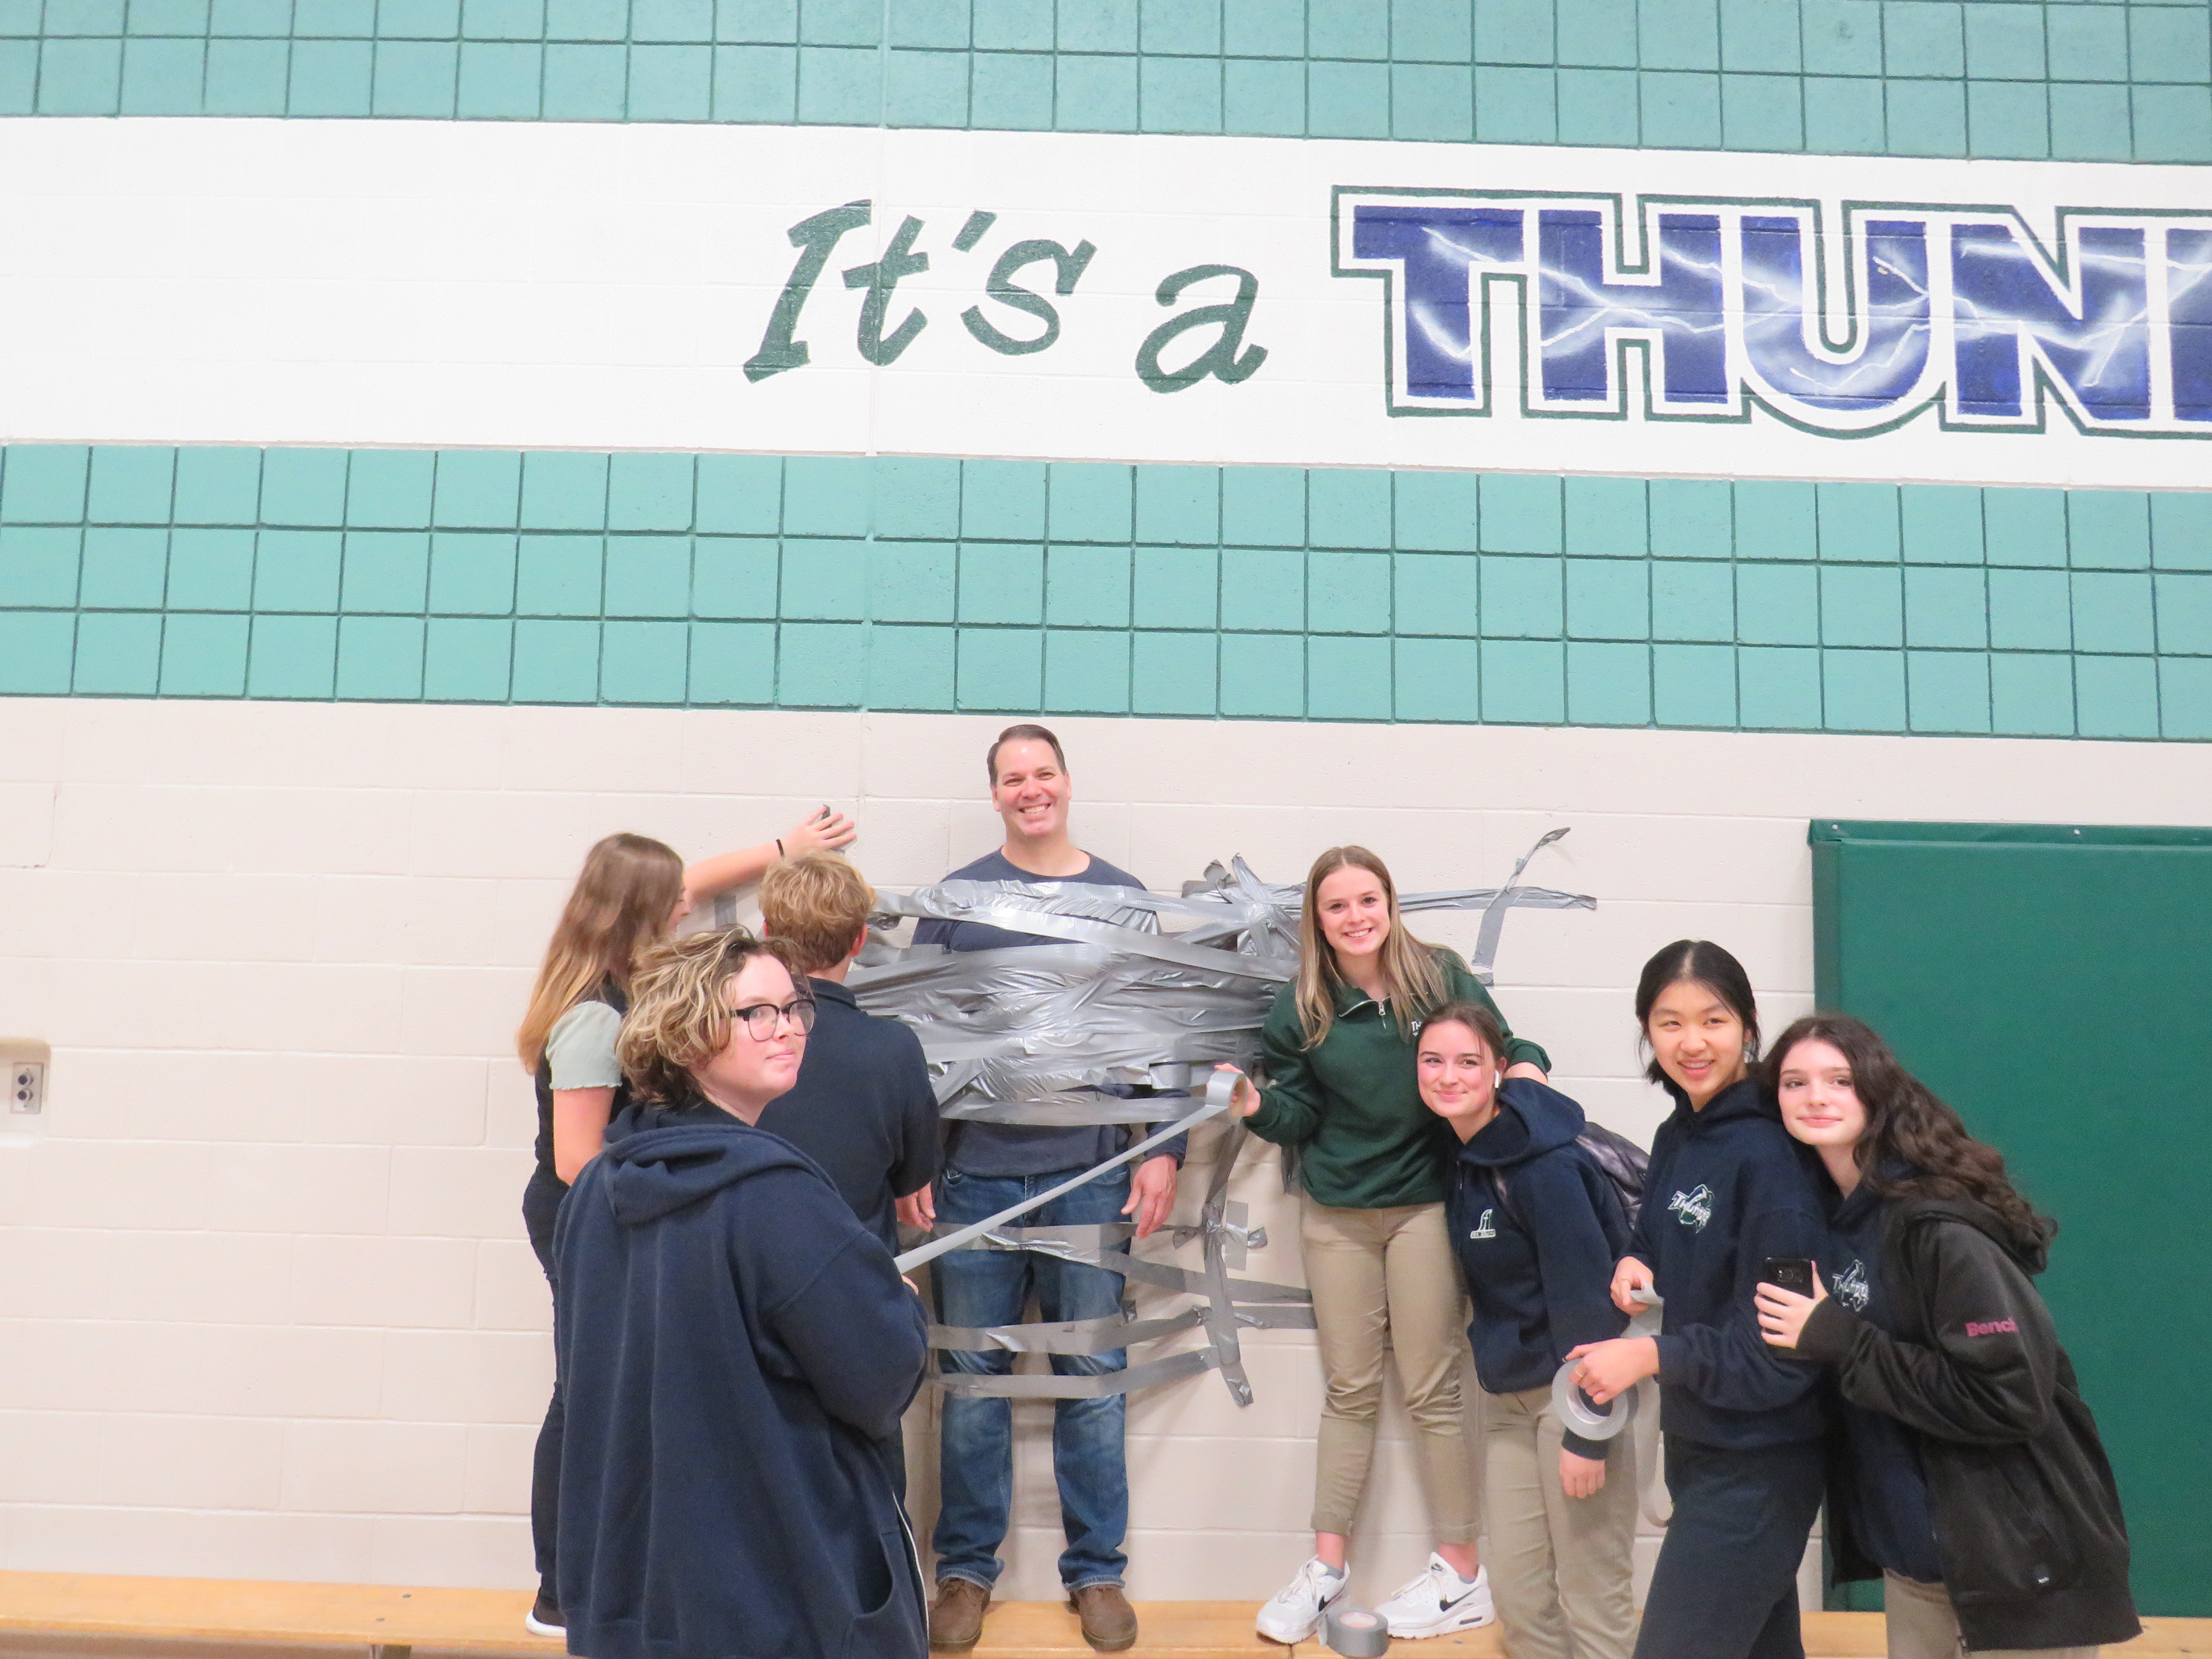 Students pose with teacher taped to wall for fundraising.